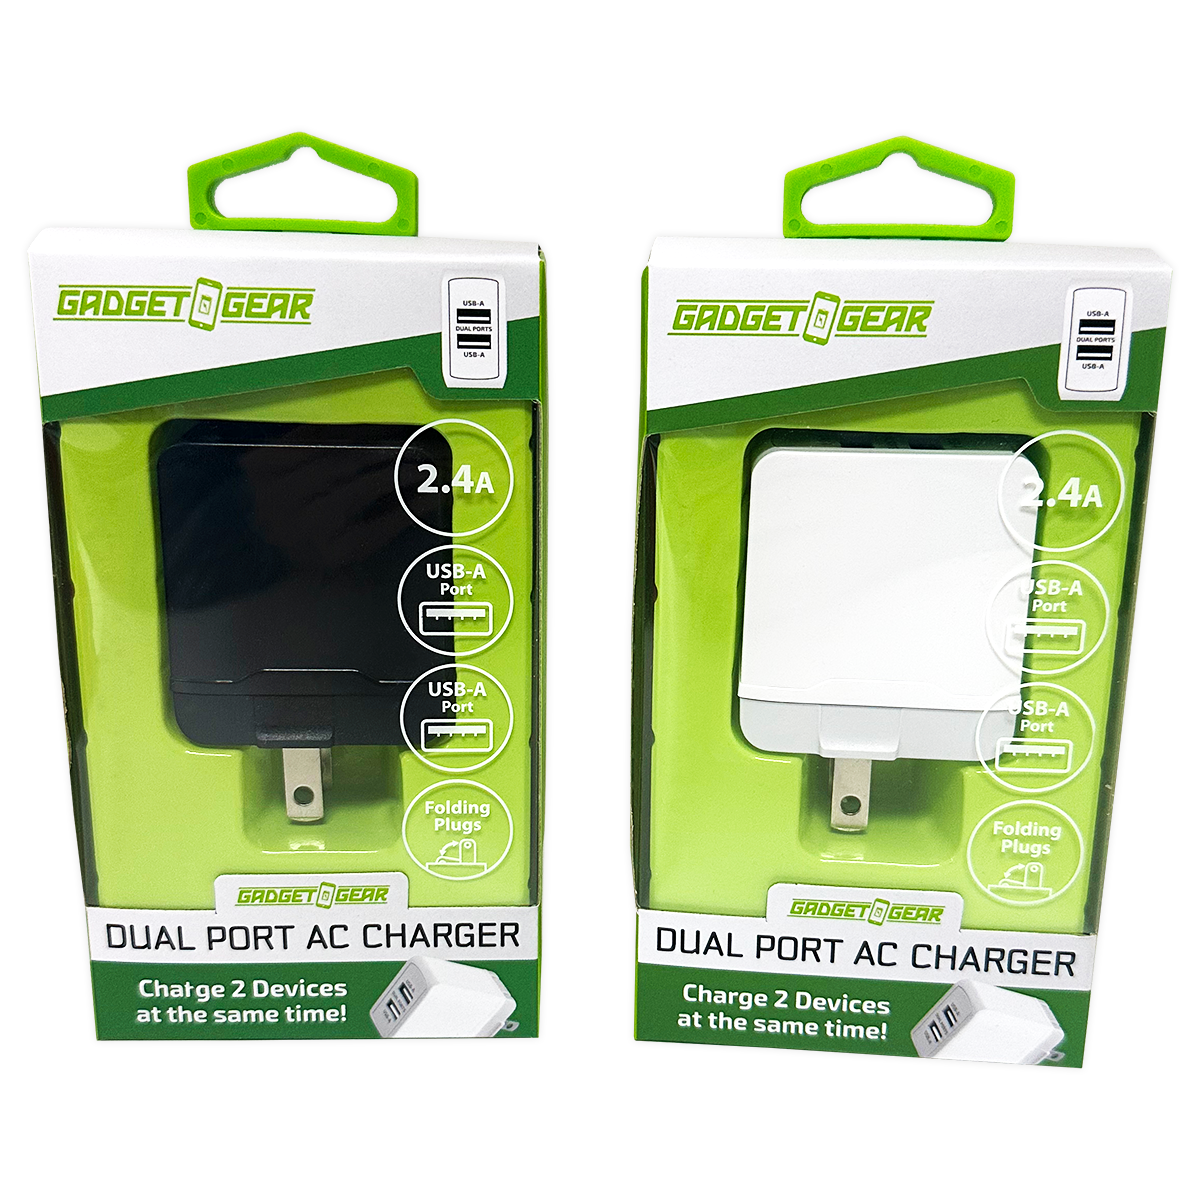 WHOLESALE 2.4A USB-A DUAL PORT WALL CHARGER 3 PIECES PER PACK 24629